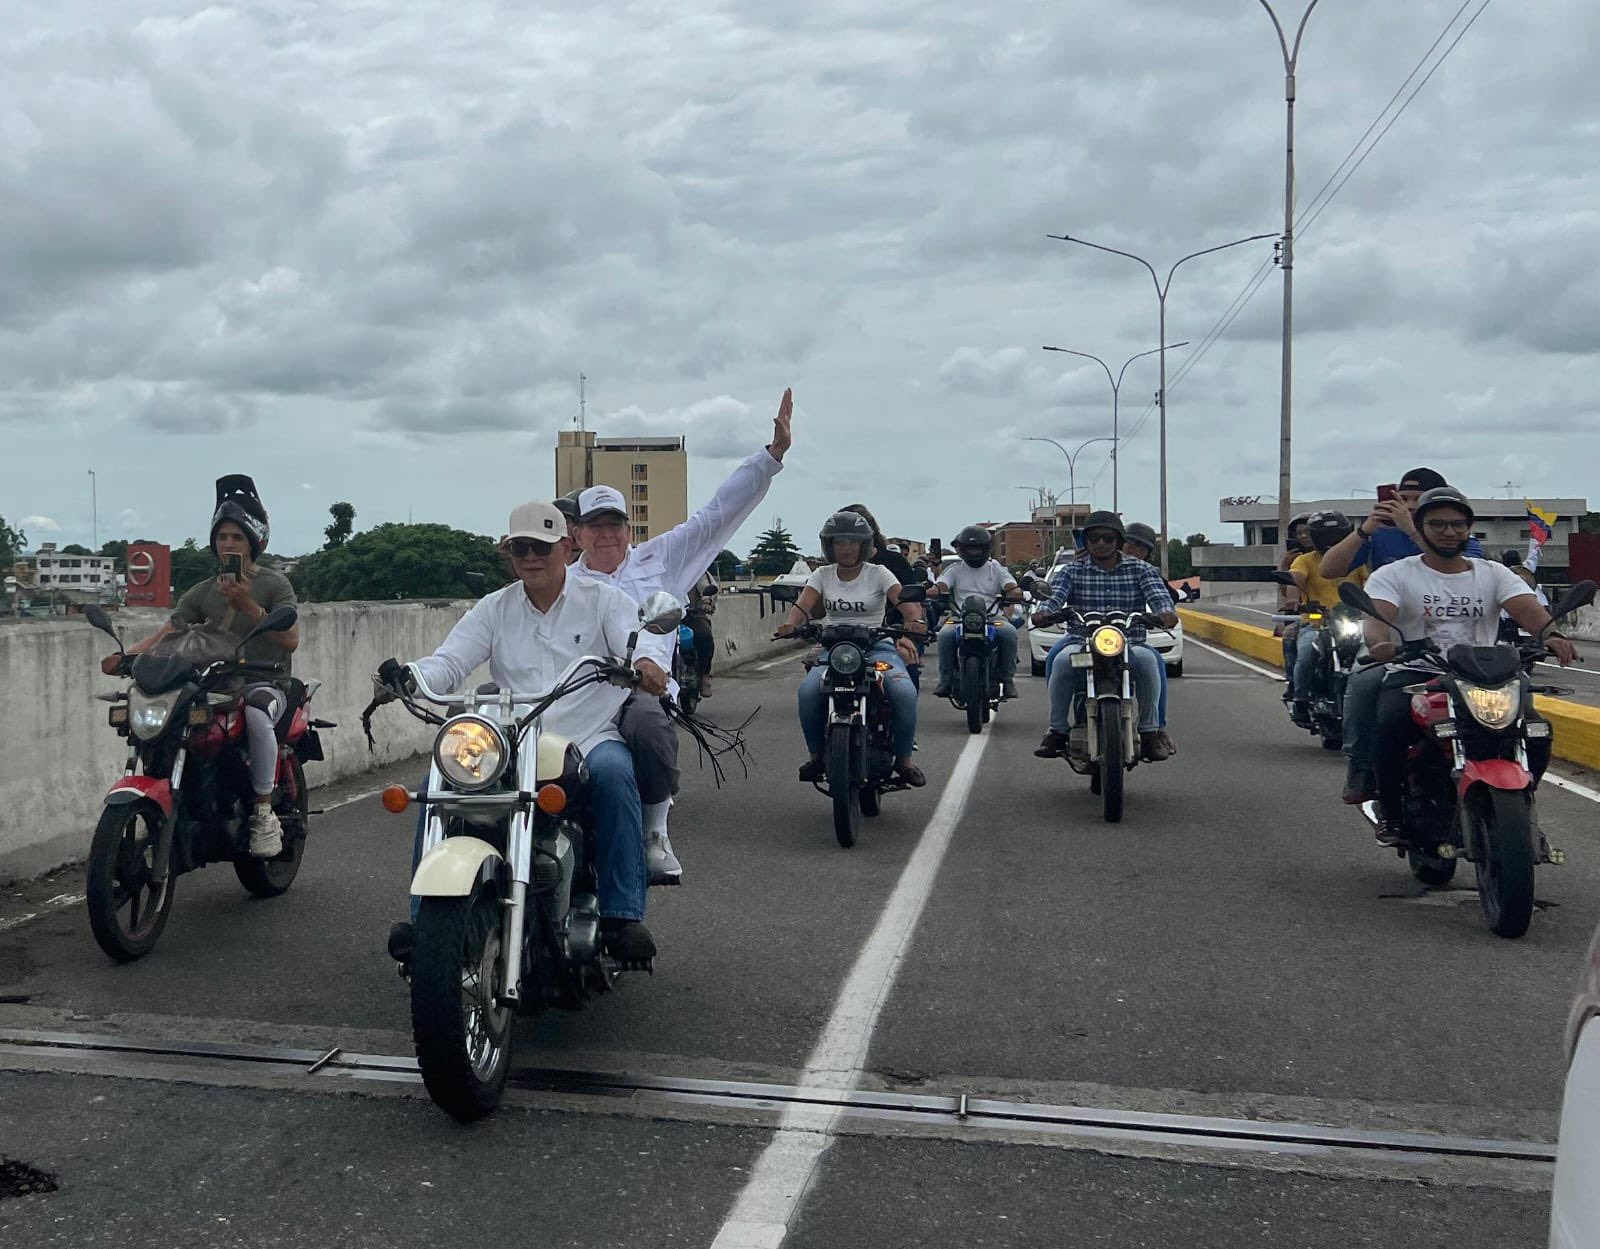 Edmundo González arrived on a motorcycle and led the “Freedom Caravan” in Barinas.